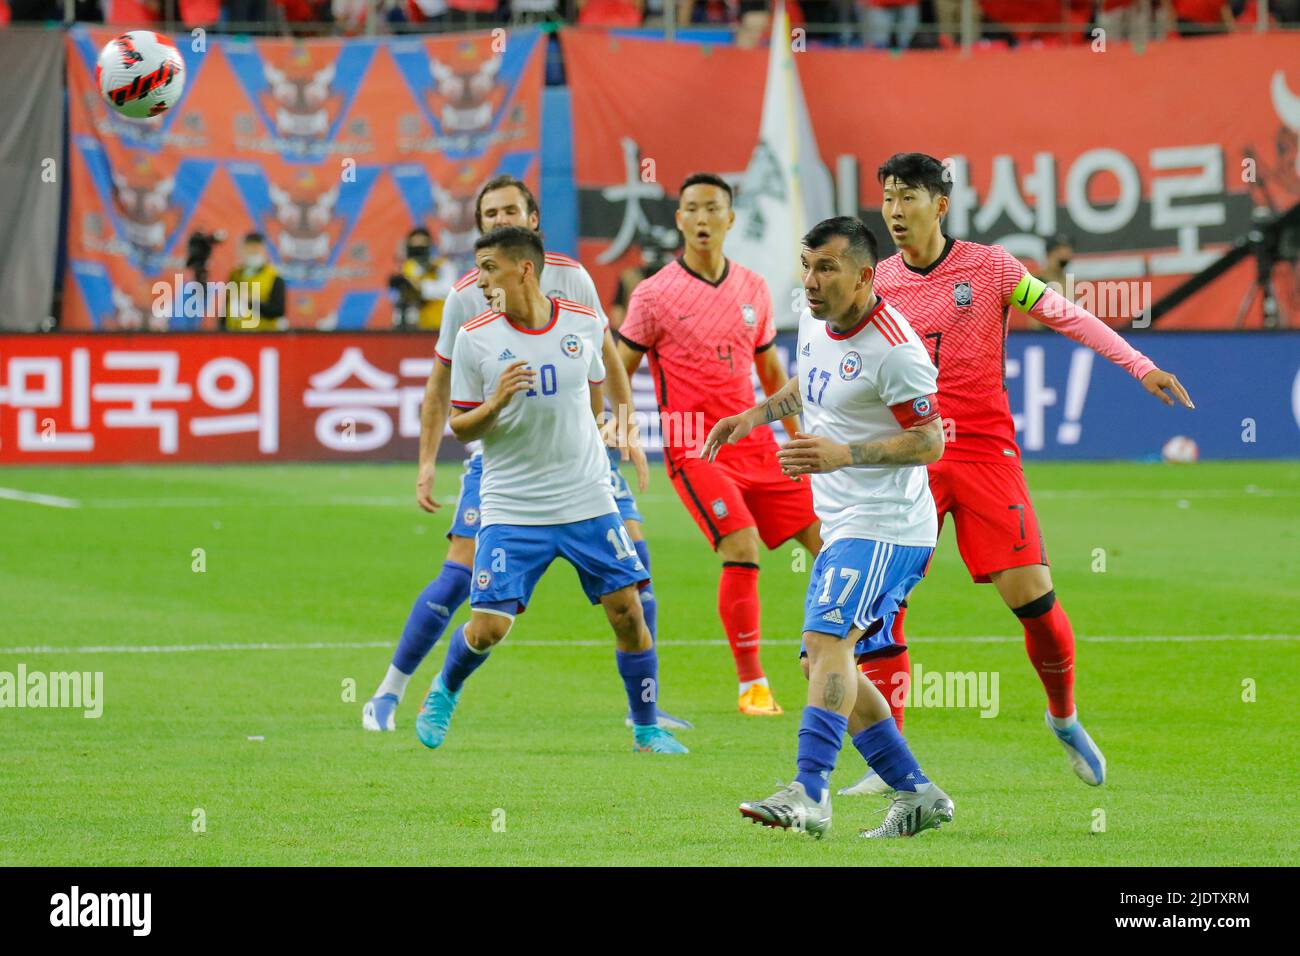 June 6, 2022-Daejeon, South Korea-Son, Heungmin(R) of South Korea and Medel, Gary(Front) of Chile action during an International Friendly match Presented by Hana Bank Korea Republic vs Chile at Daejeon Worldcup Stadium in Daejeon, South Korea. Stock Photo